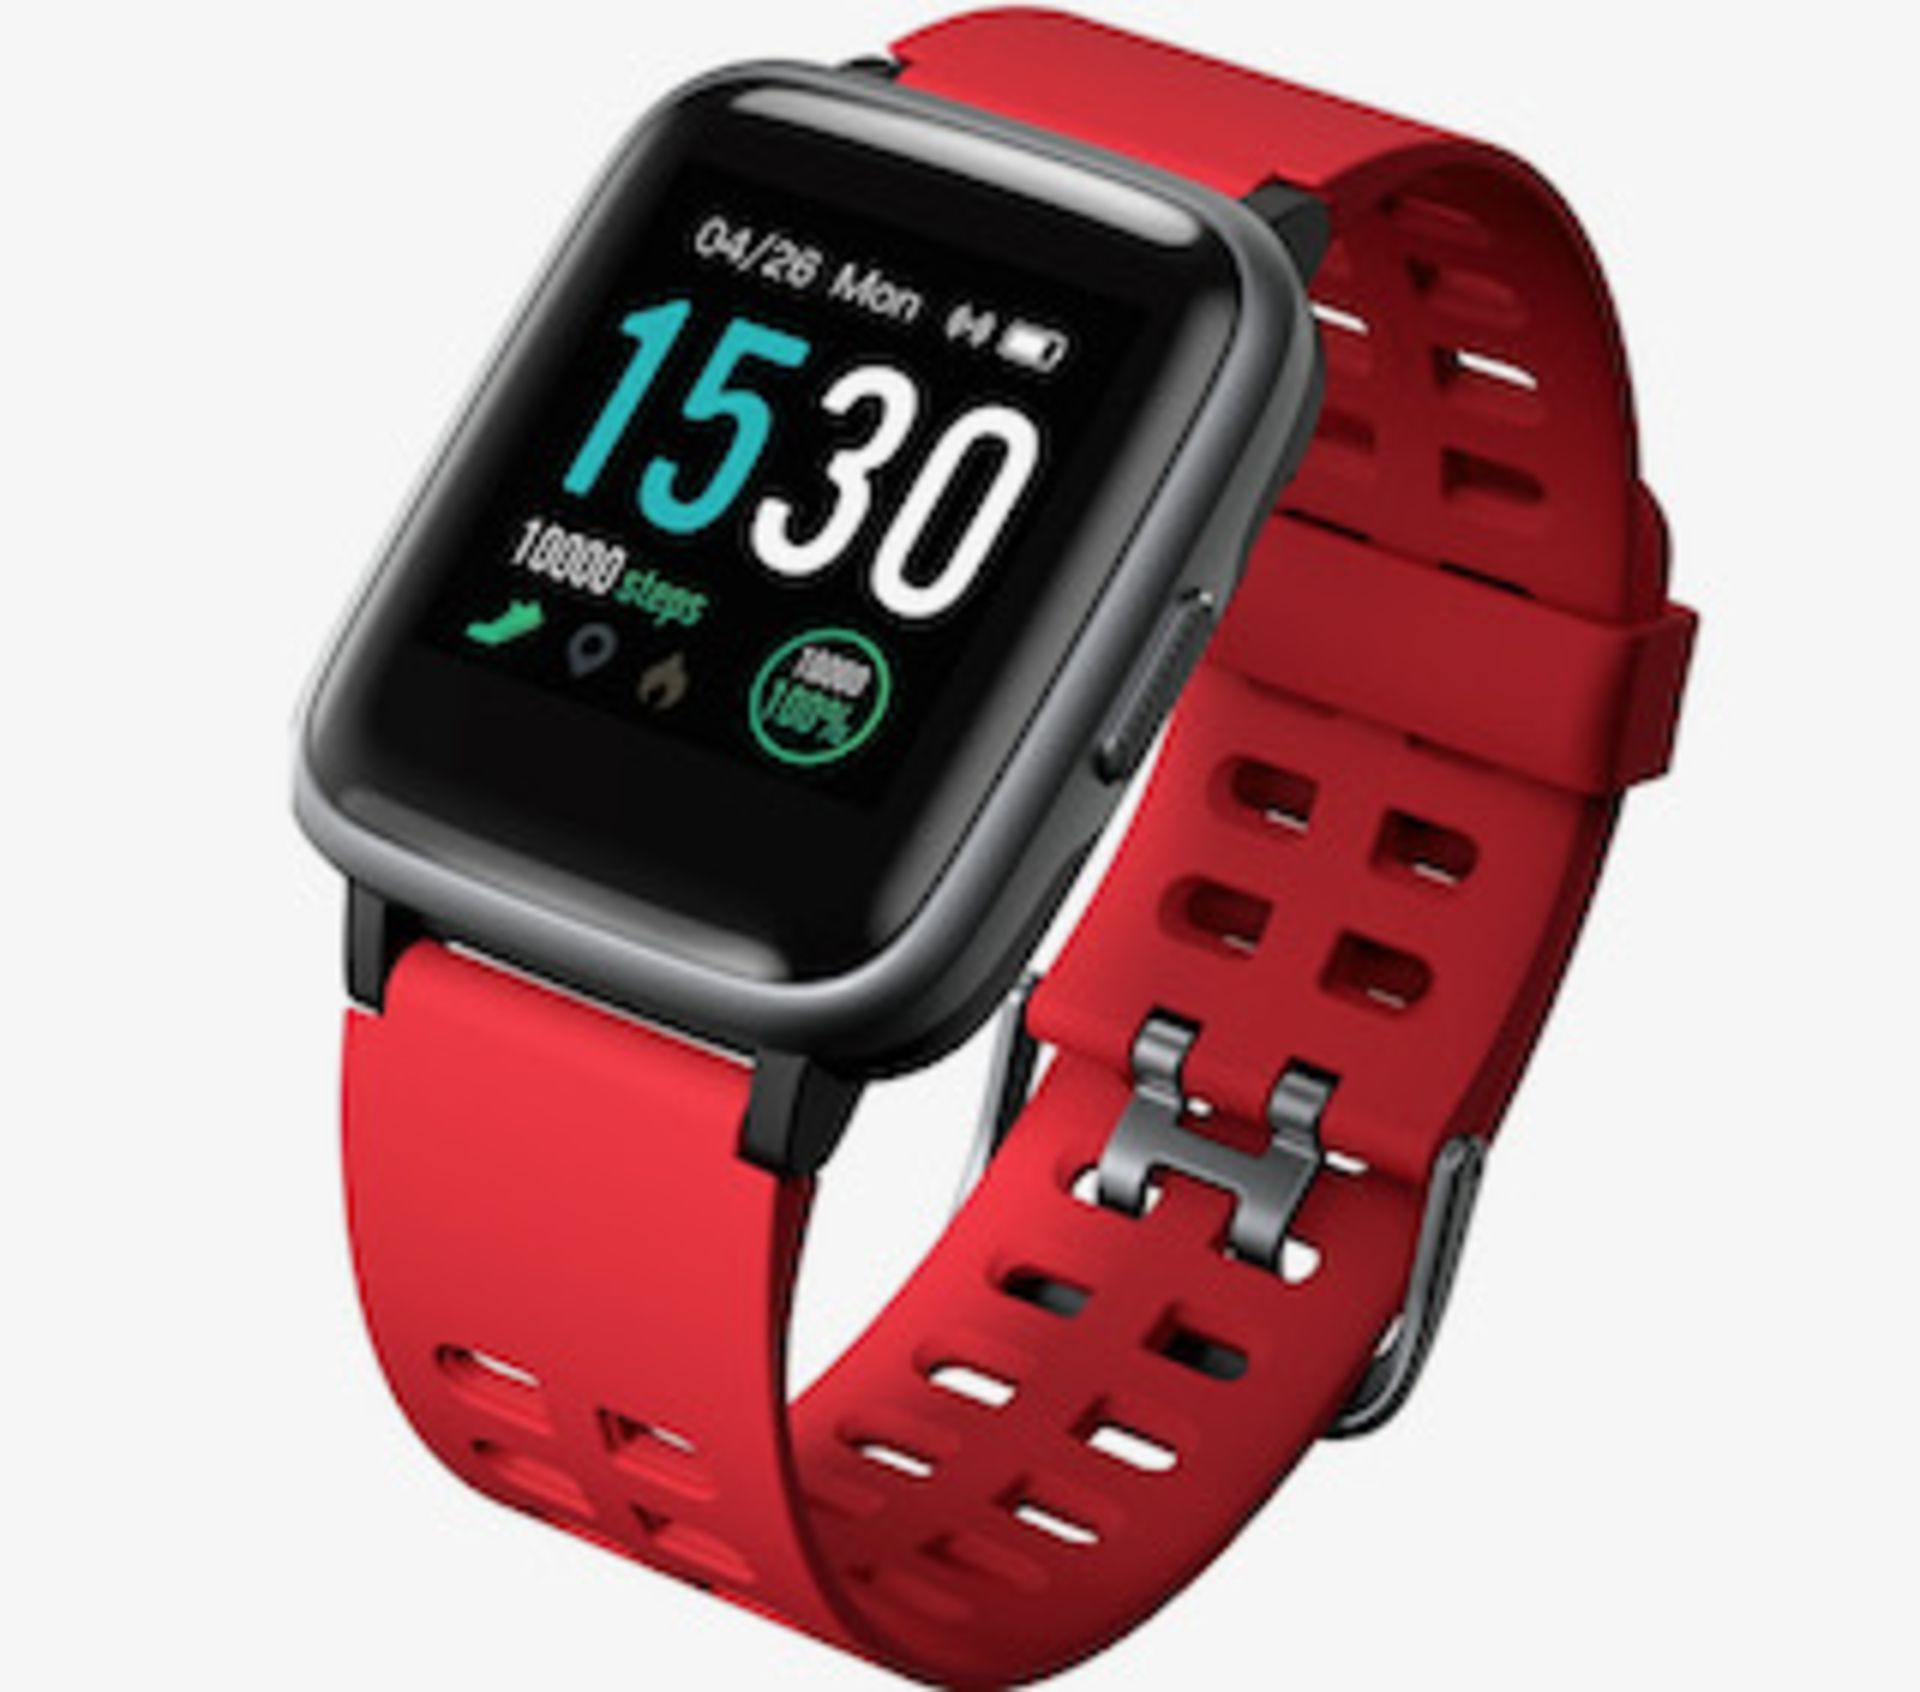 Brand New Unisex Fitness Tracker Watch Id205 Red Strap About This Item 1.3-Inch LCD Colour - Image 17 of 34